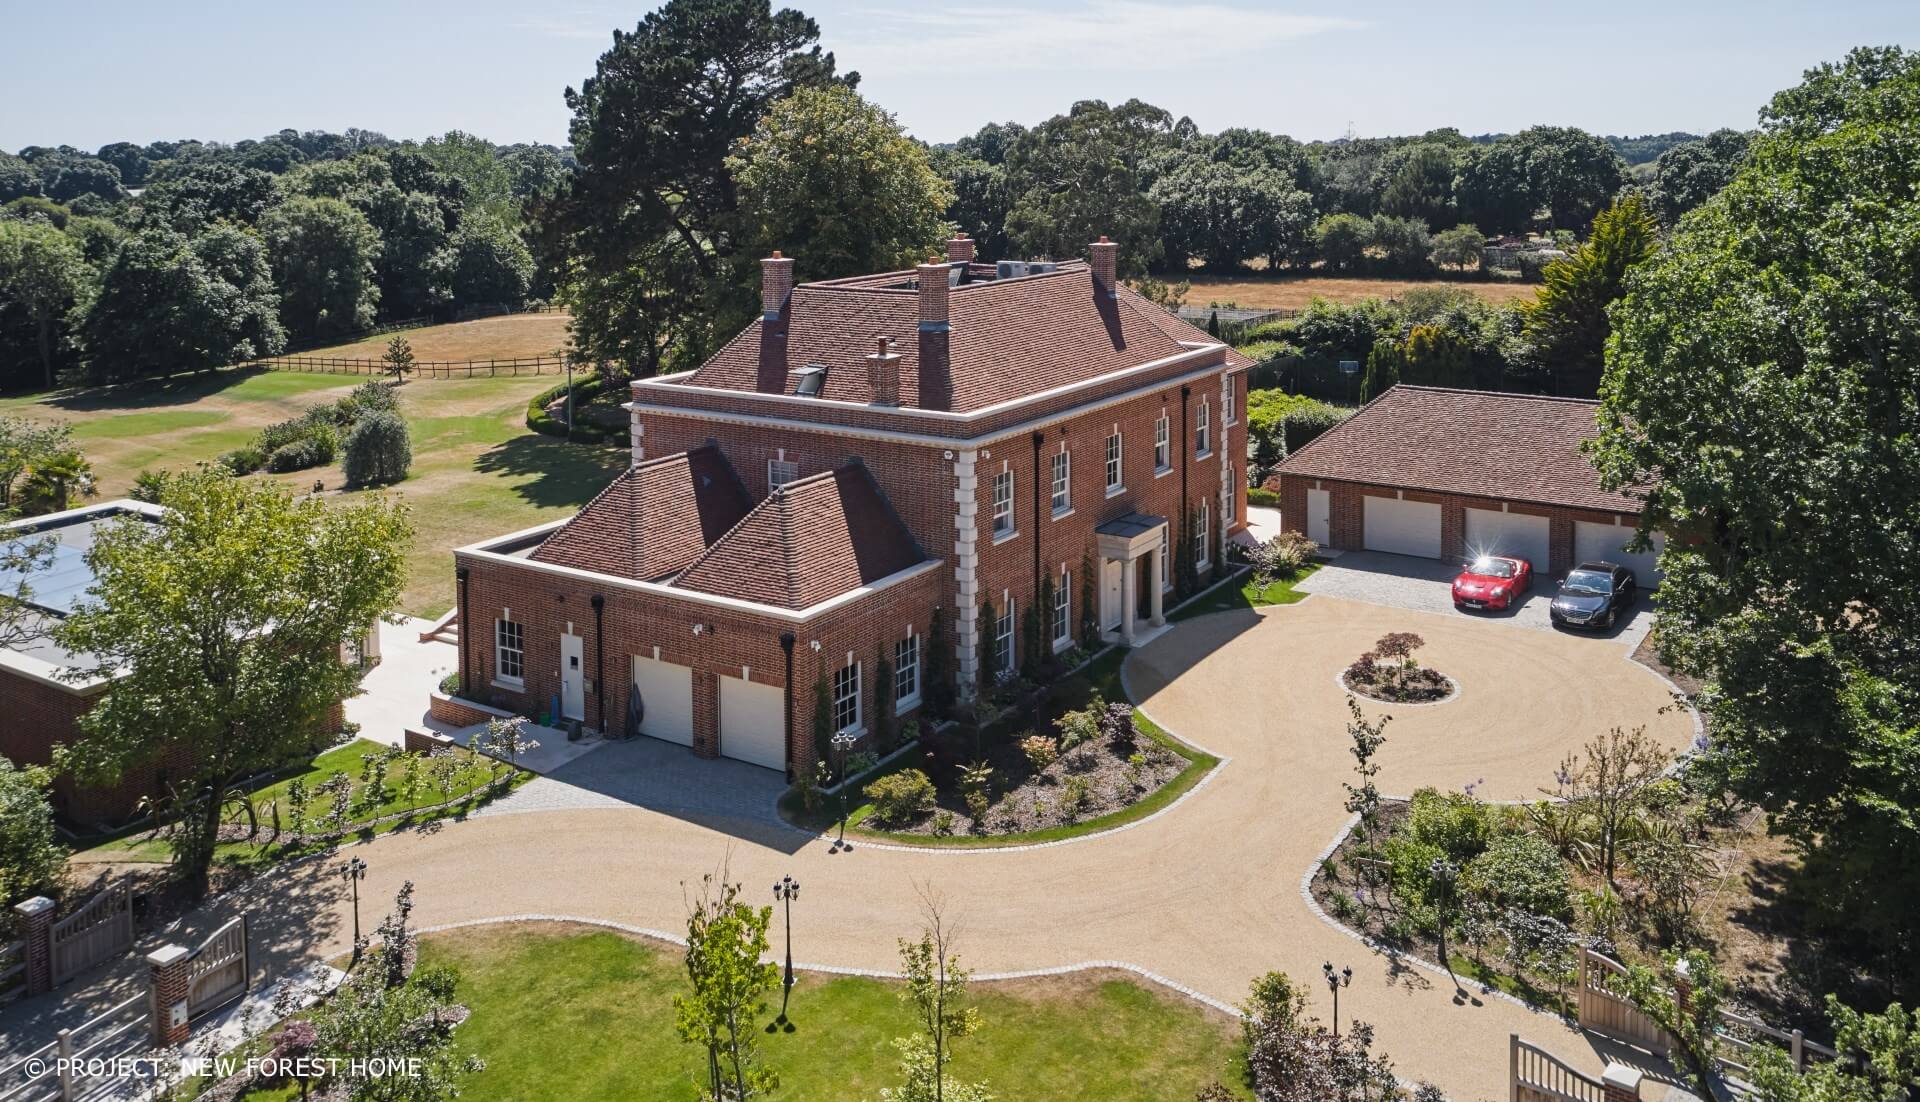 New Forest Home – Complete Home